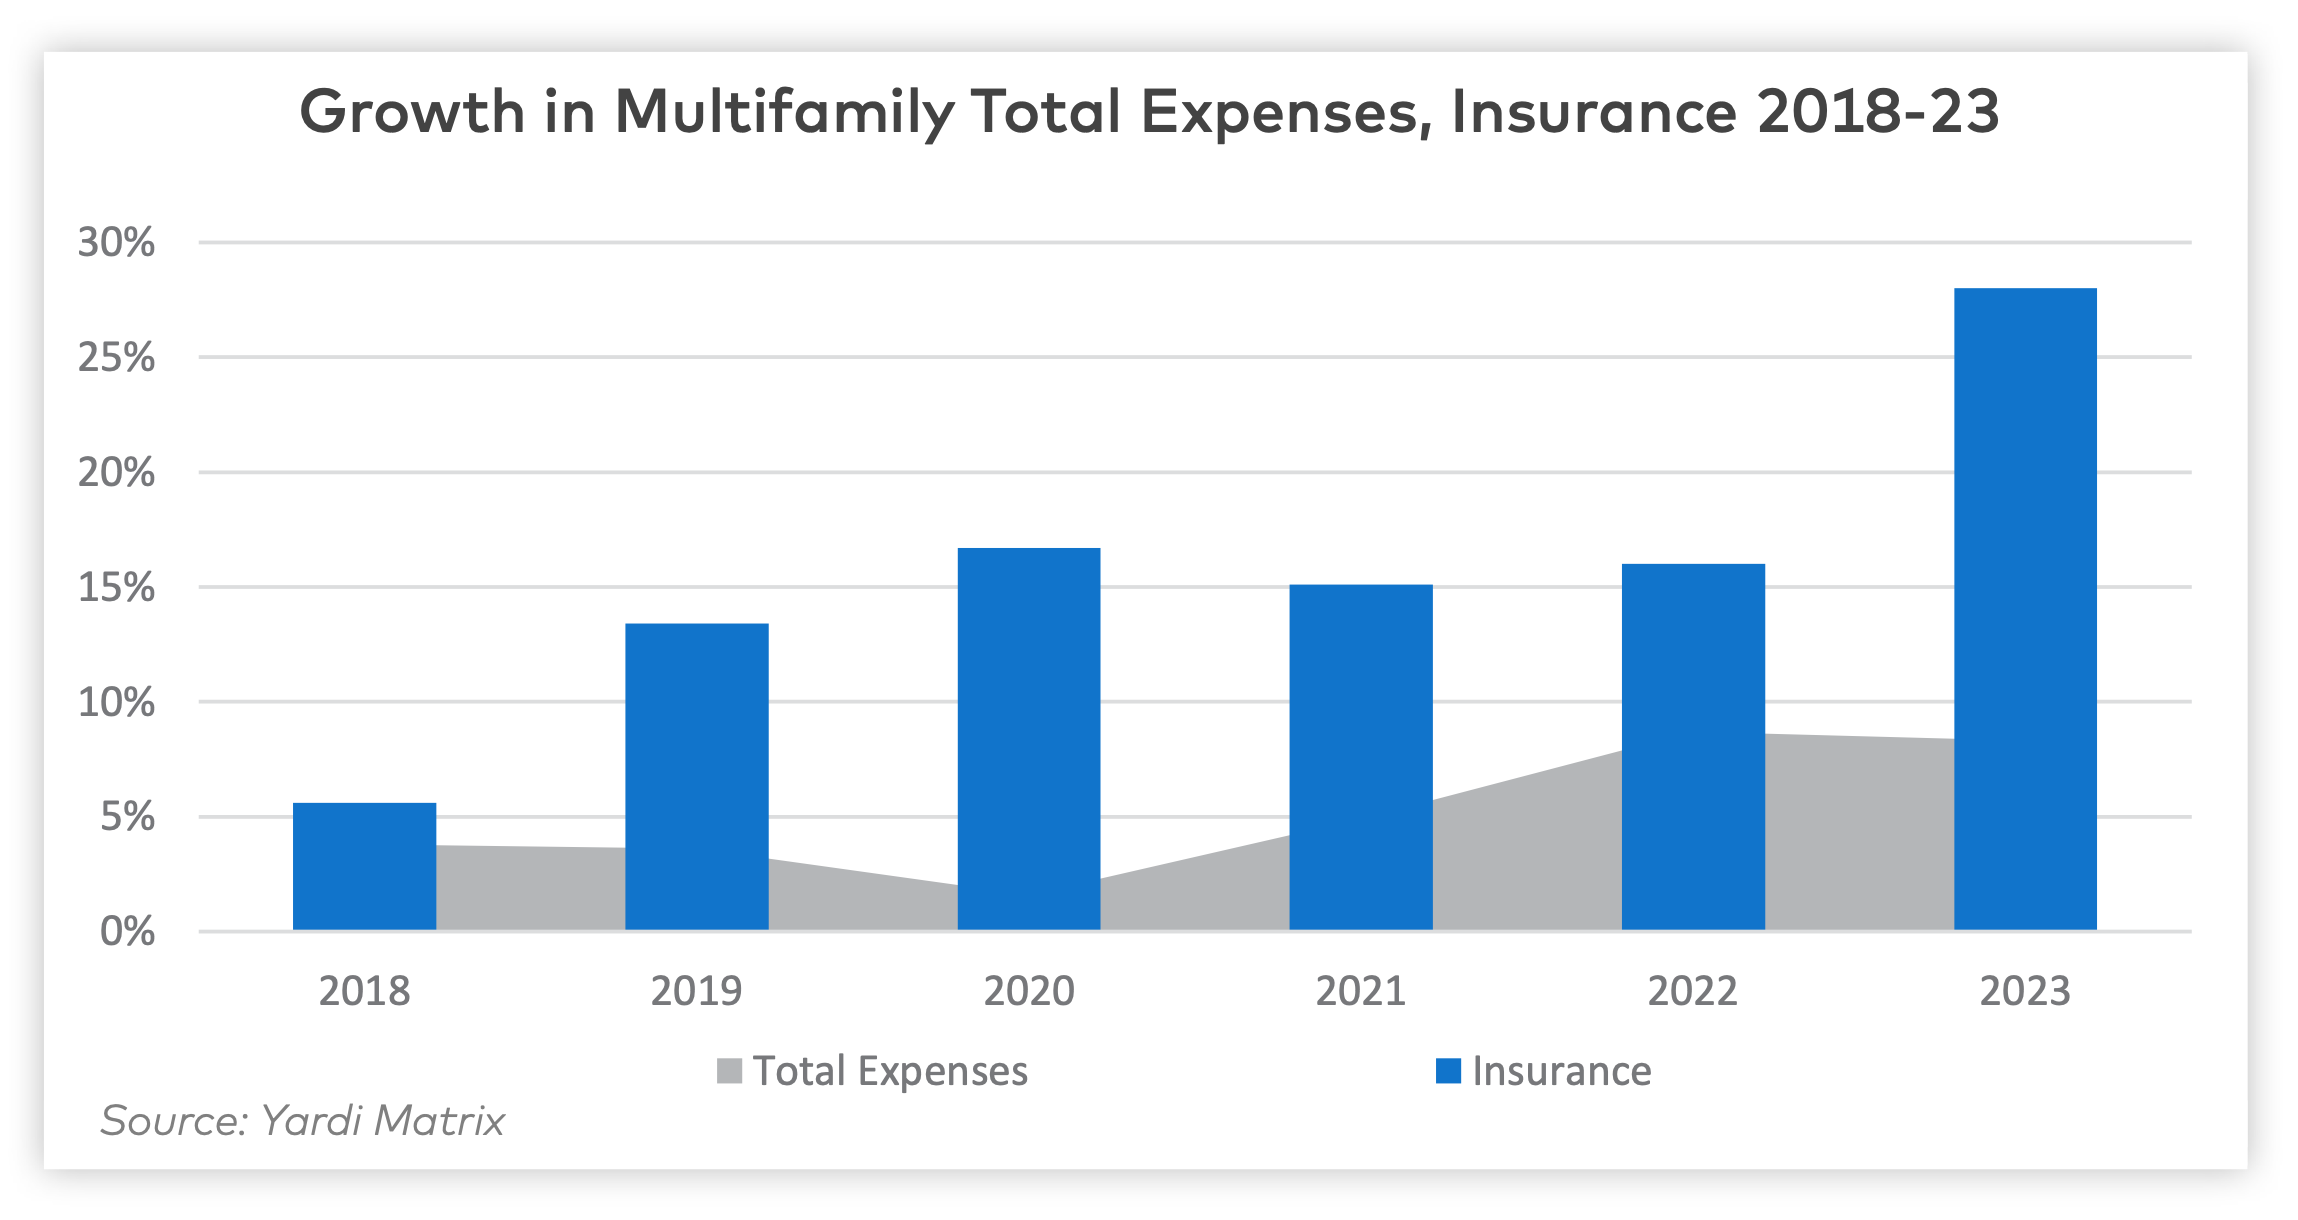 Yardi Matrix growth in multifamily total expenses for insurance since 2018